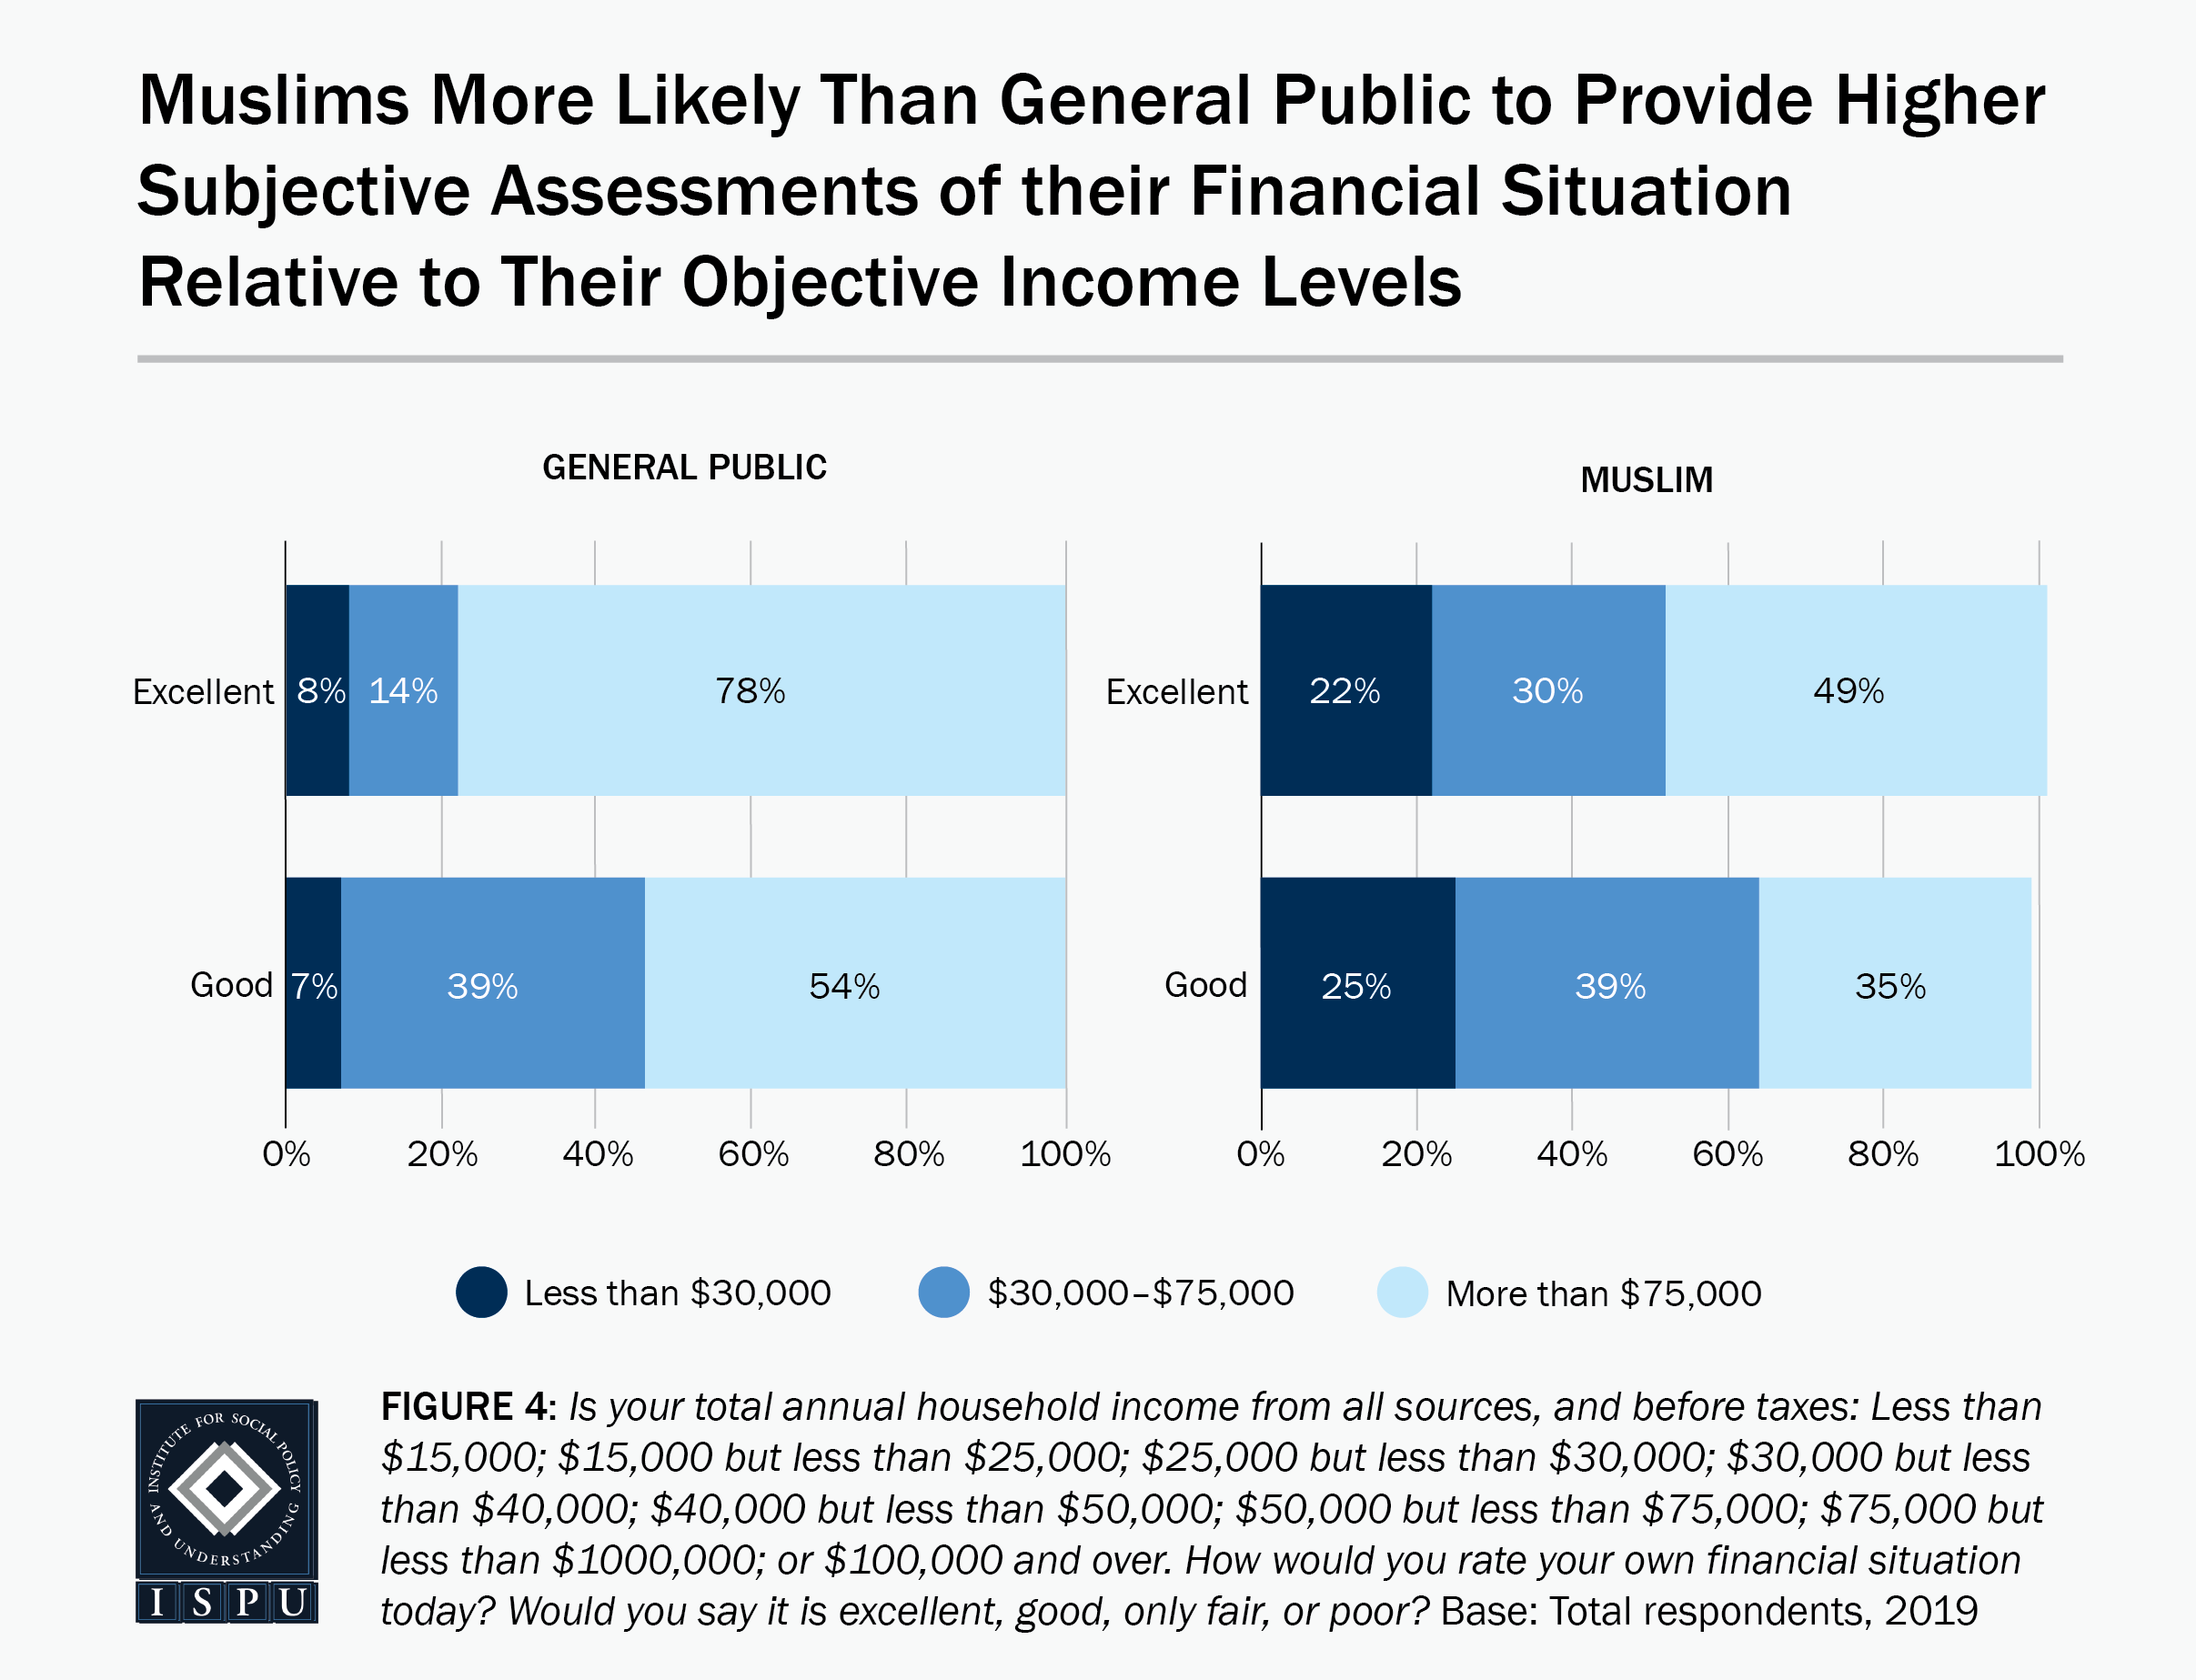 Figure 4: A bar graph showing that Muslims are more likely than the general public to provide higher subjective assessments of their financial situation relative to their objective income levels